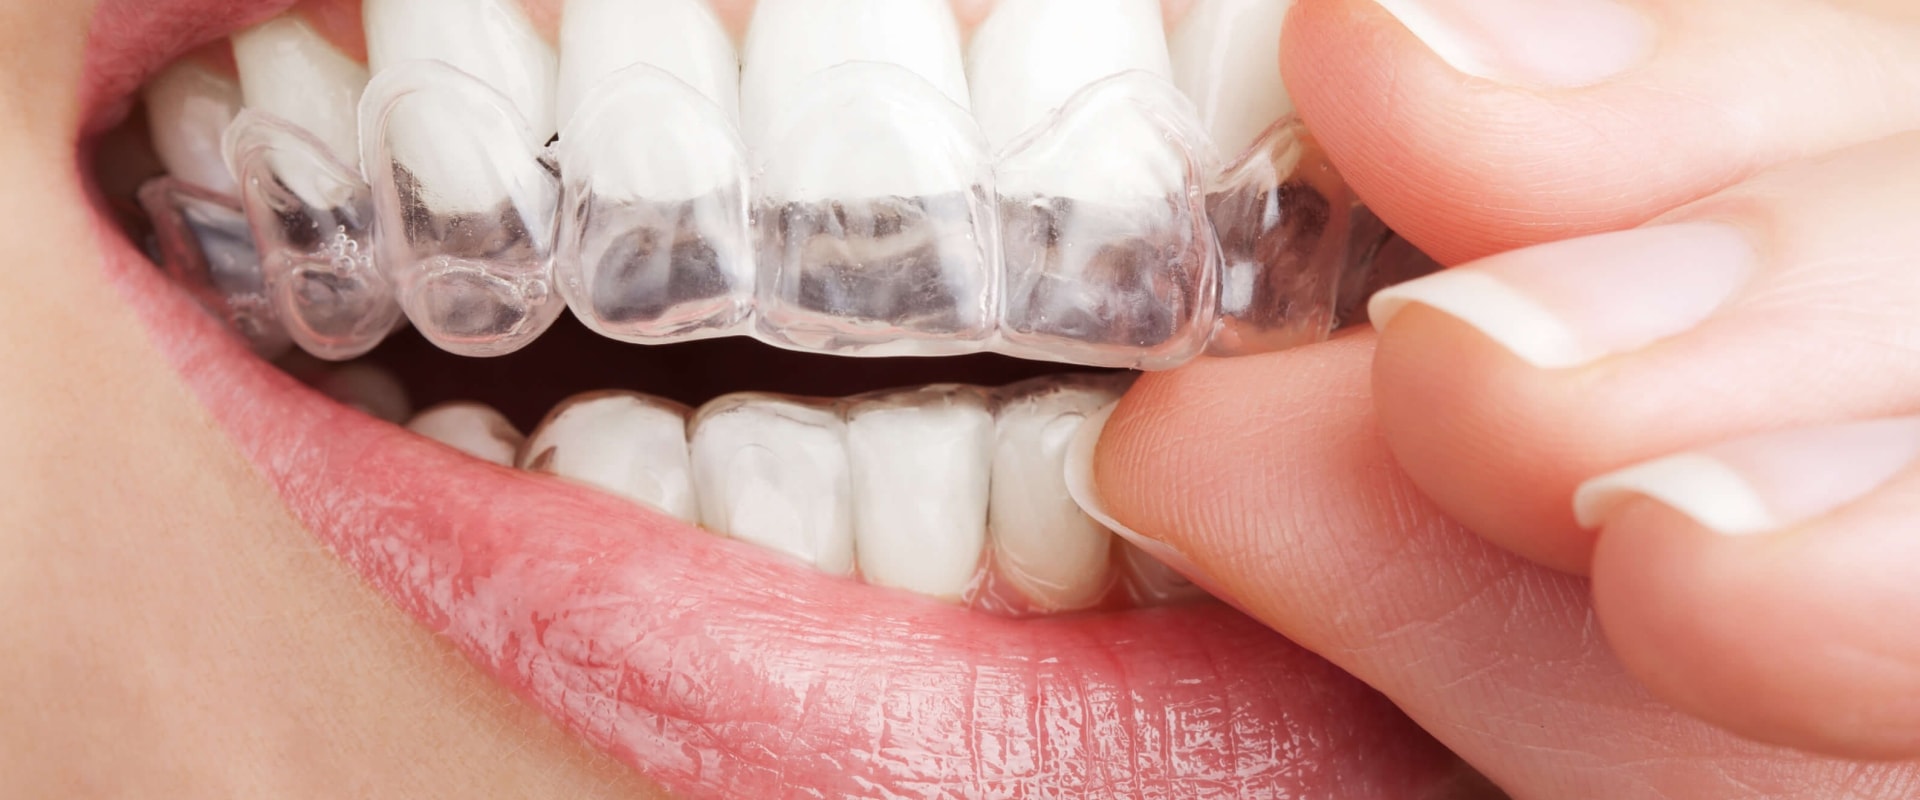 Is invisalign as good as braces?